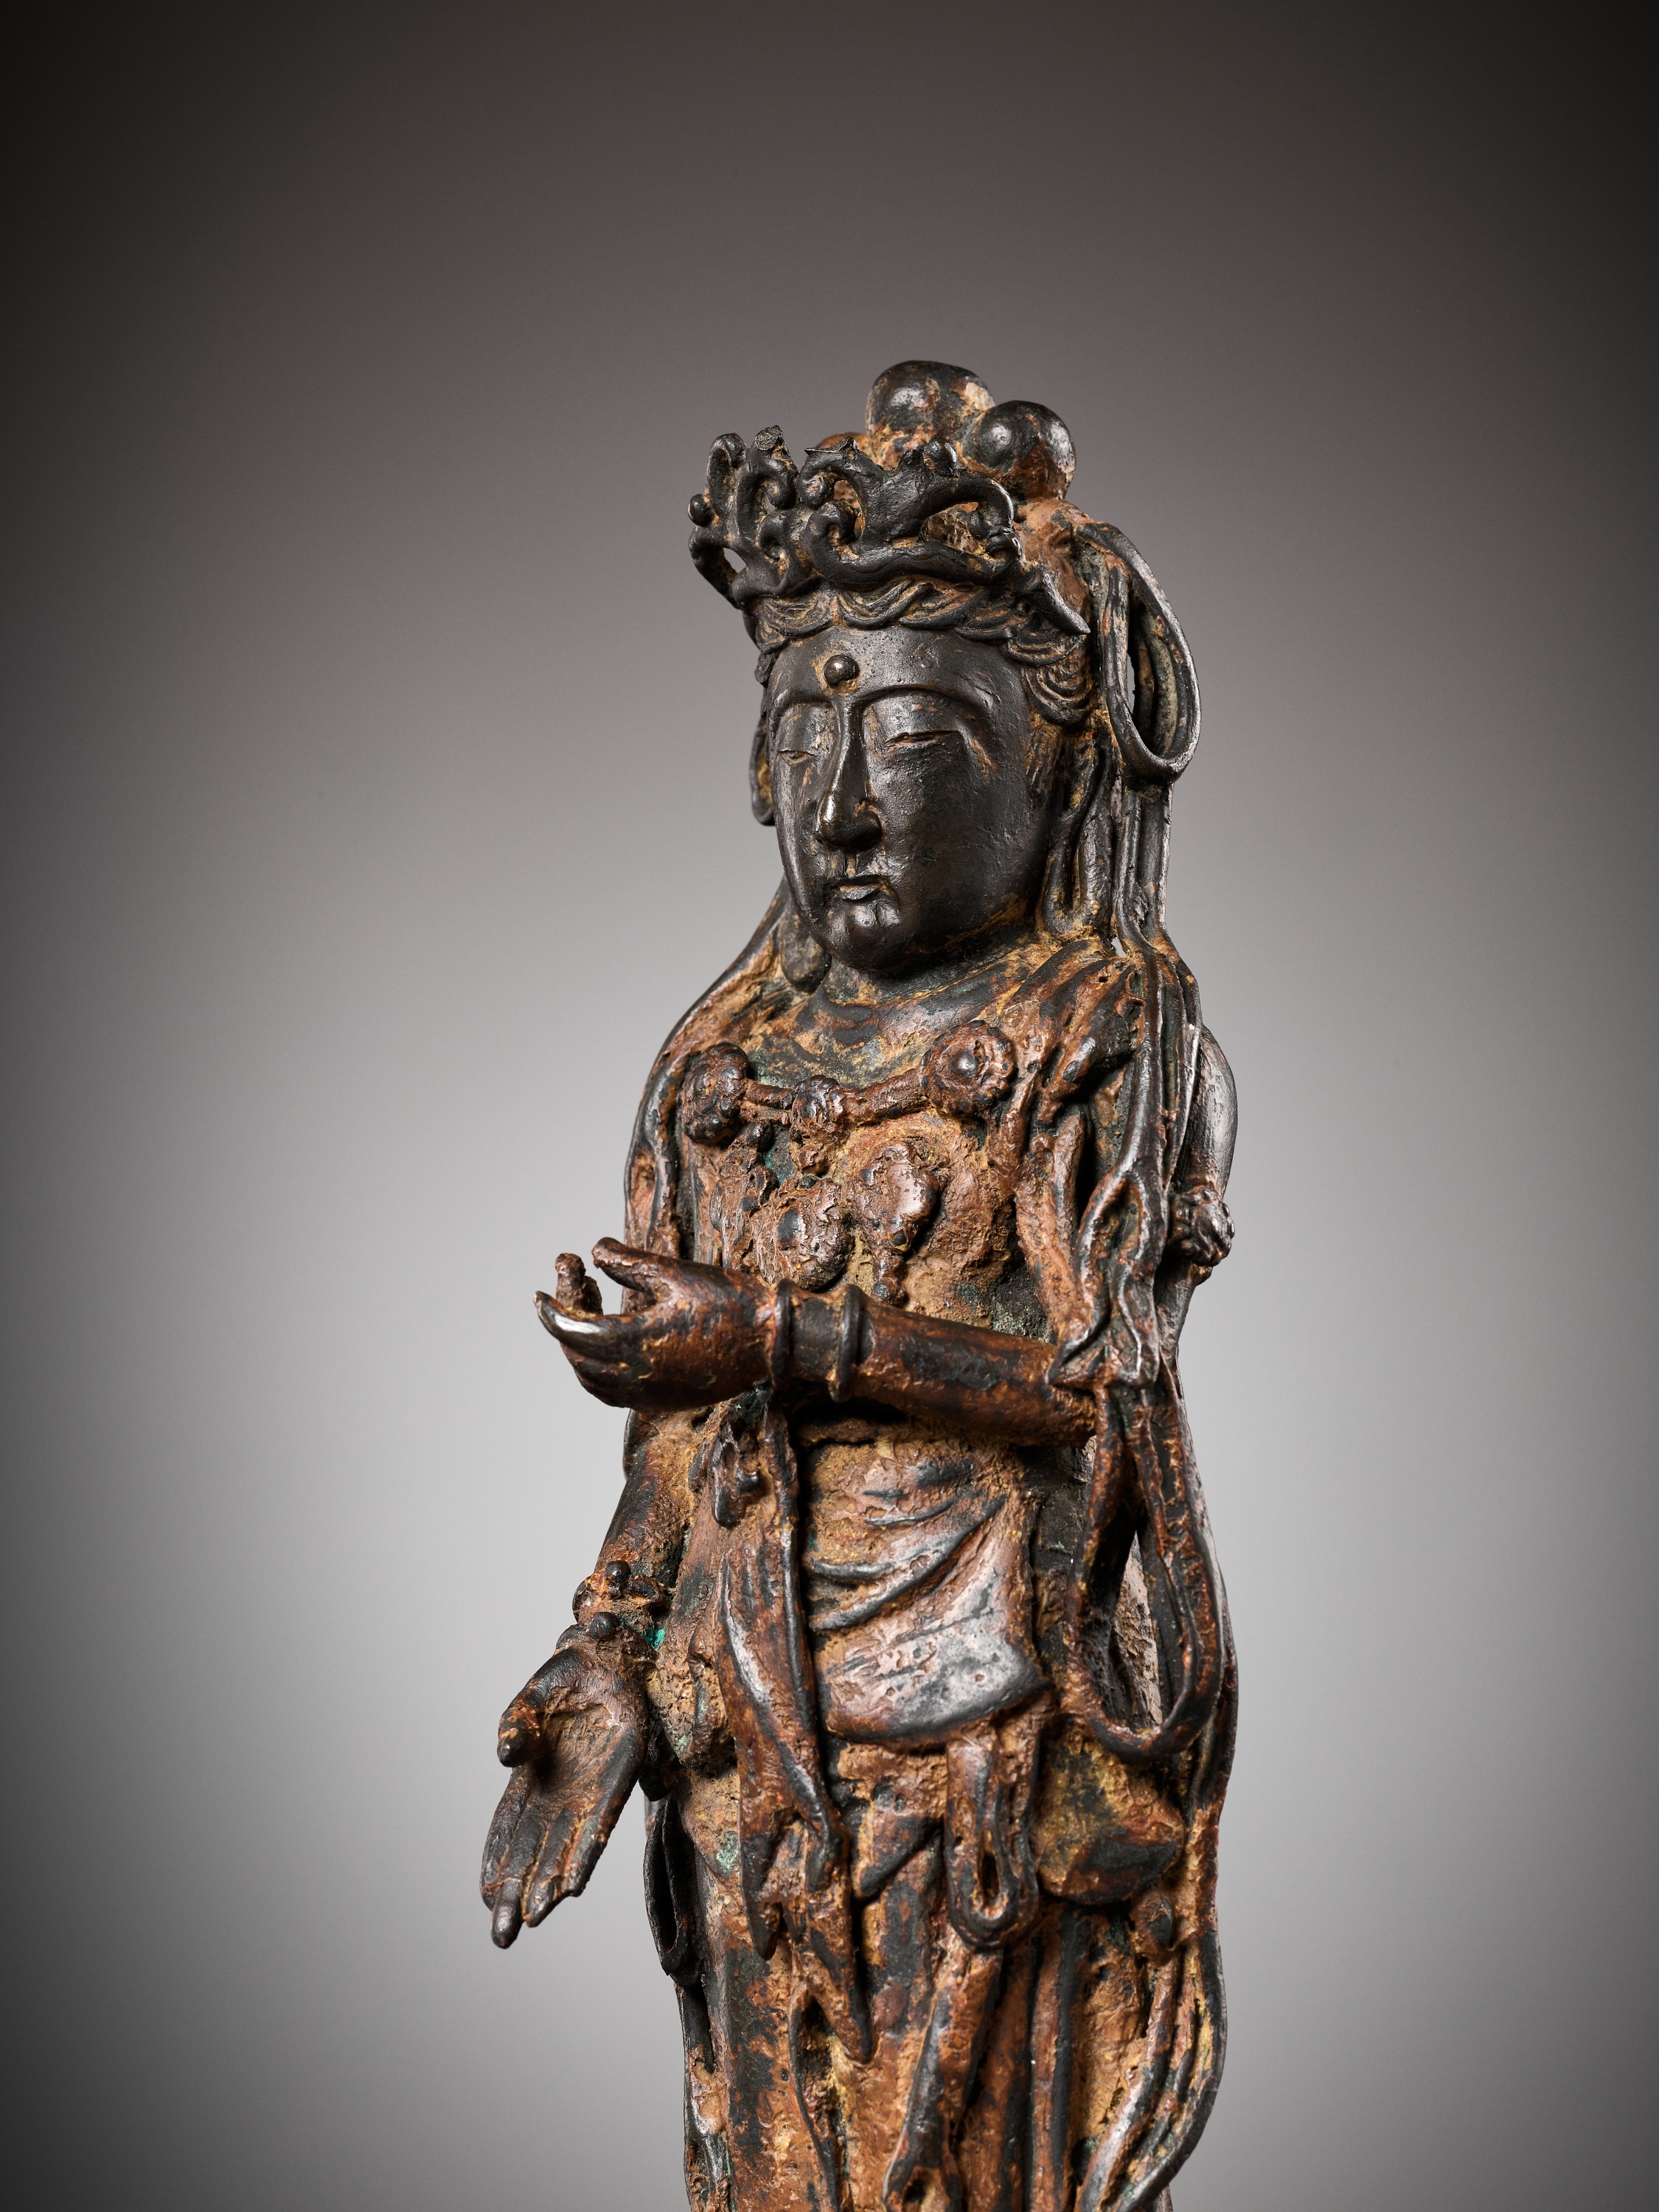 AN EXCEEDINGLY RARE BRONZE FIGURE OF GUANYIN, DALI KINGDOM, 12TH - MID-13TH CENTURY - Image 12 of 20